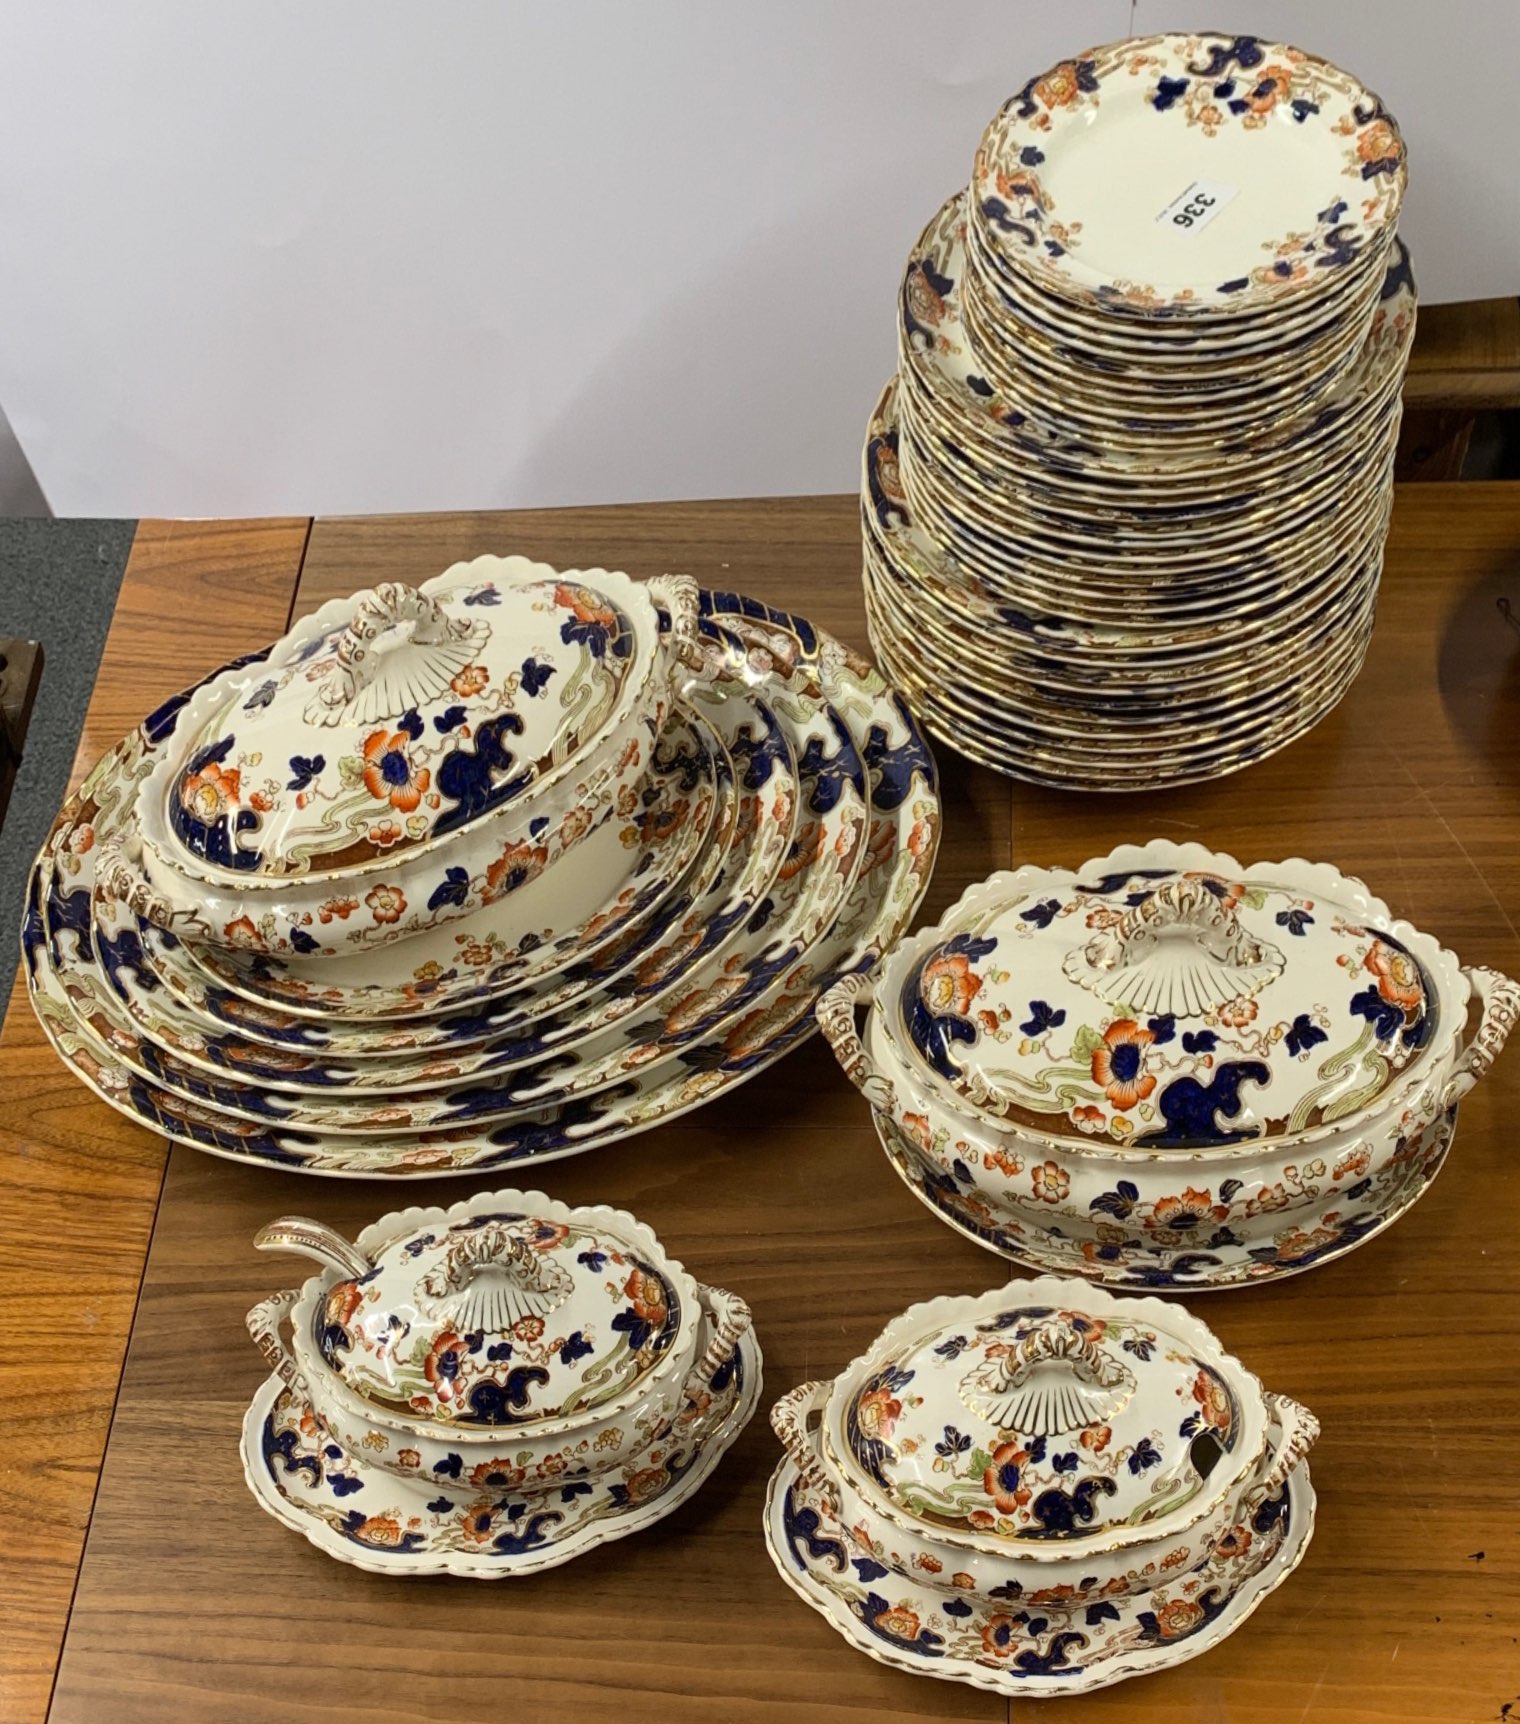 A very extensive 19th/ early 20th century Keeling & Co Tokio pattern dinner service. Minimum 10